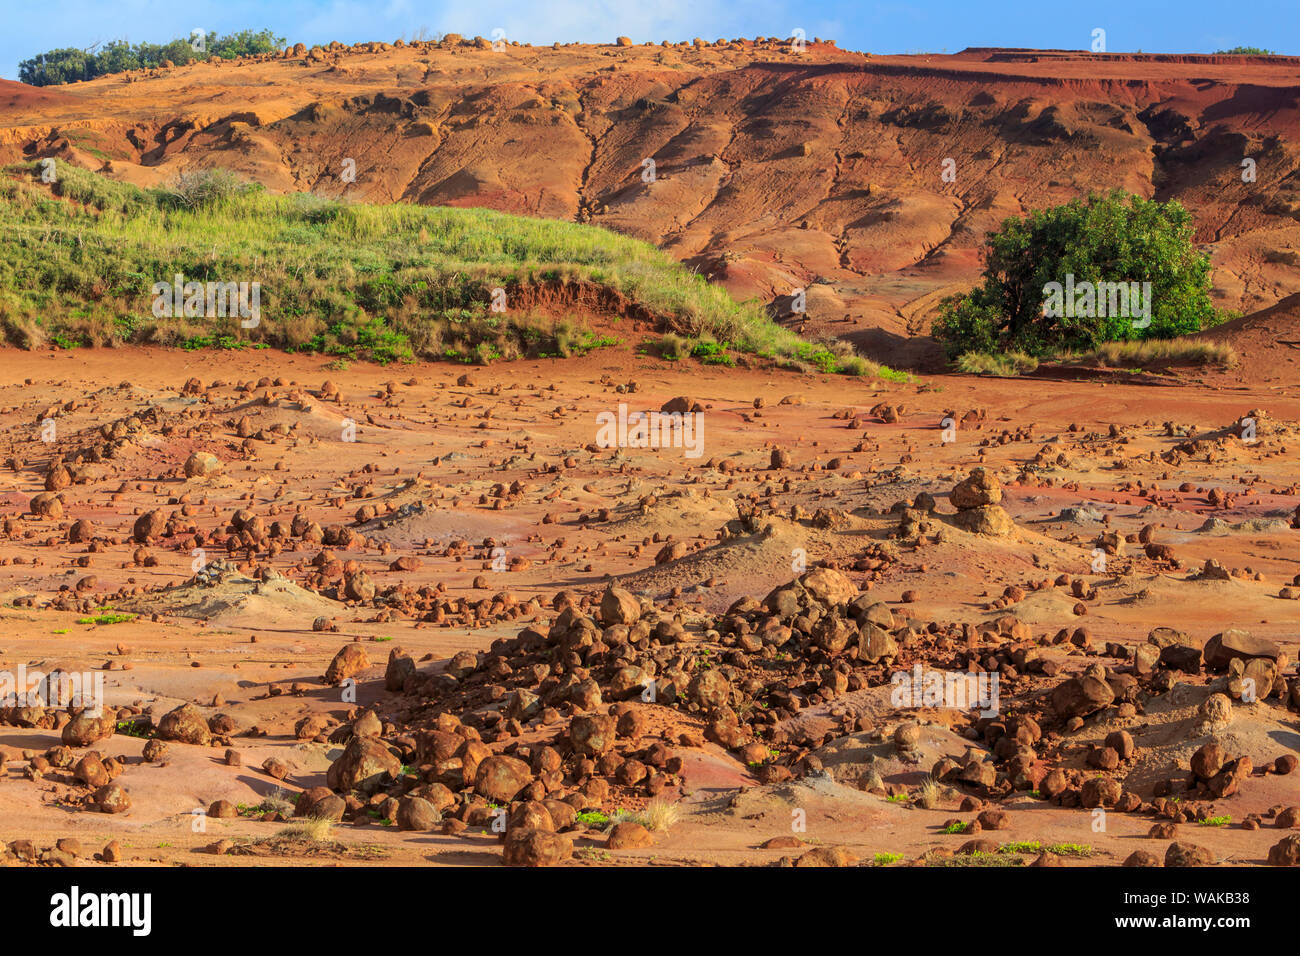 Kaehiakawaelo (Garden of the Gods), a Martian landscape of red dirt, purple lava and rock formations created by ages of erosion. Lanai Island, Hawaii, USA Stock Photo